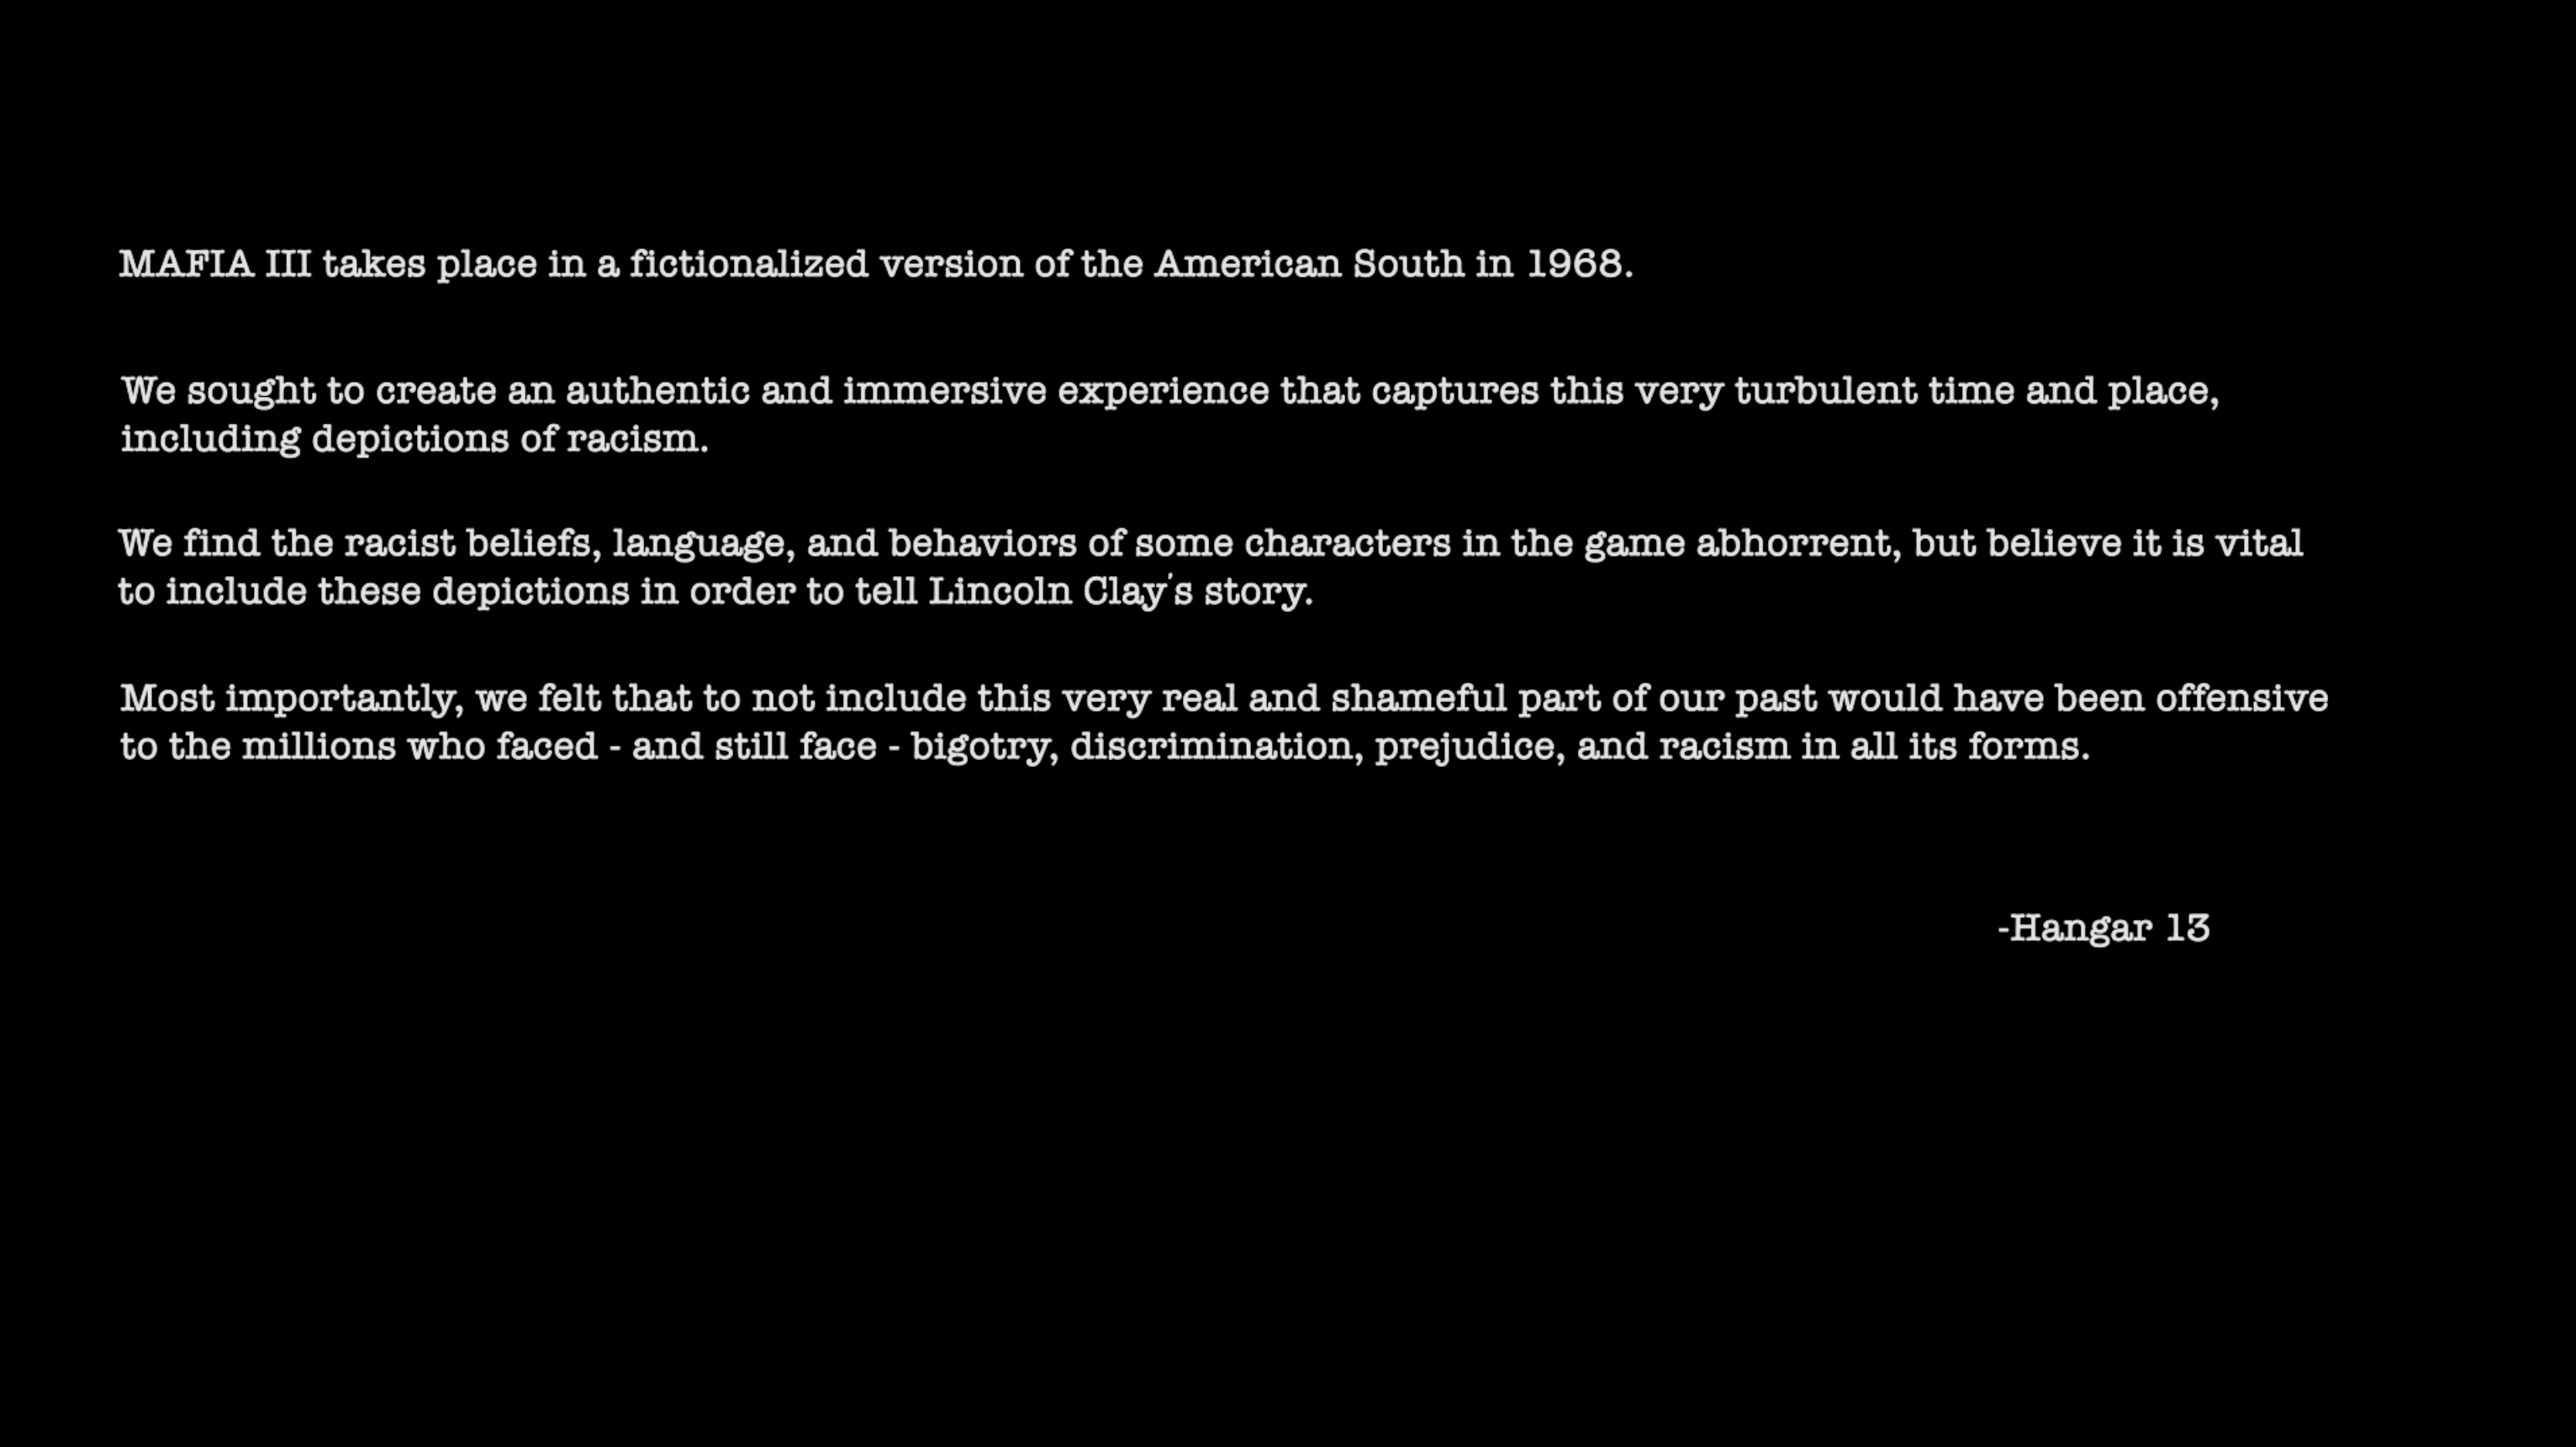 Mafia 3's in-game statement on its depiction of racism